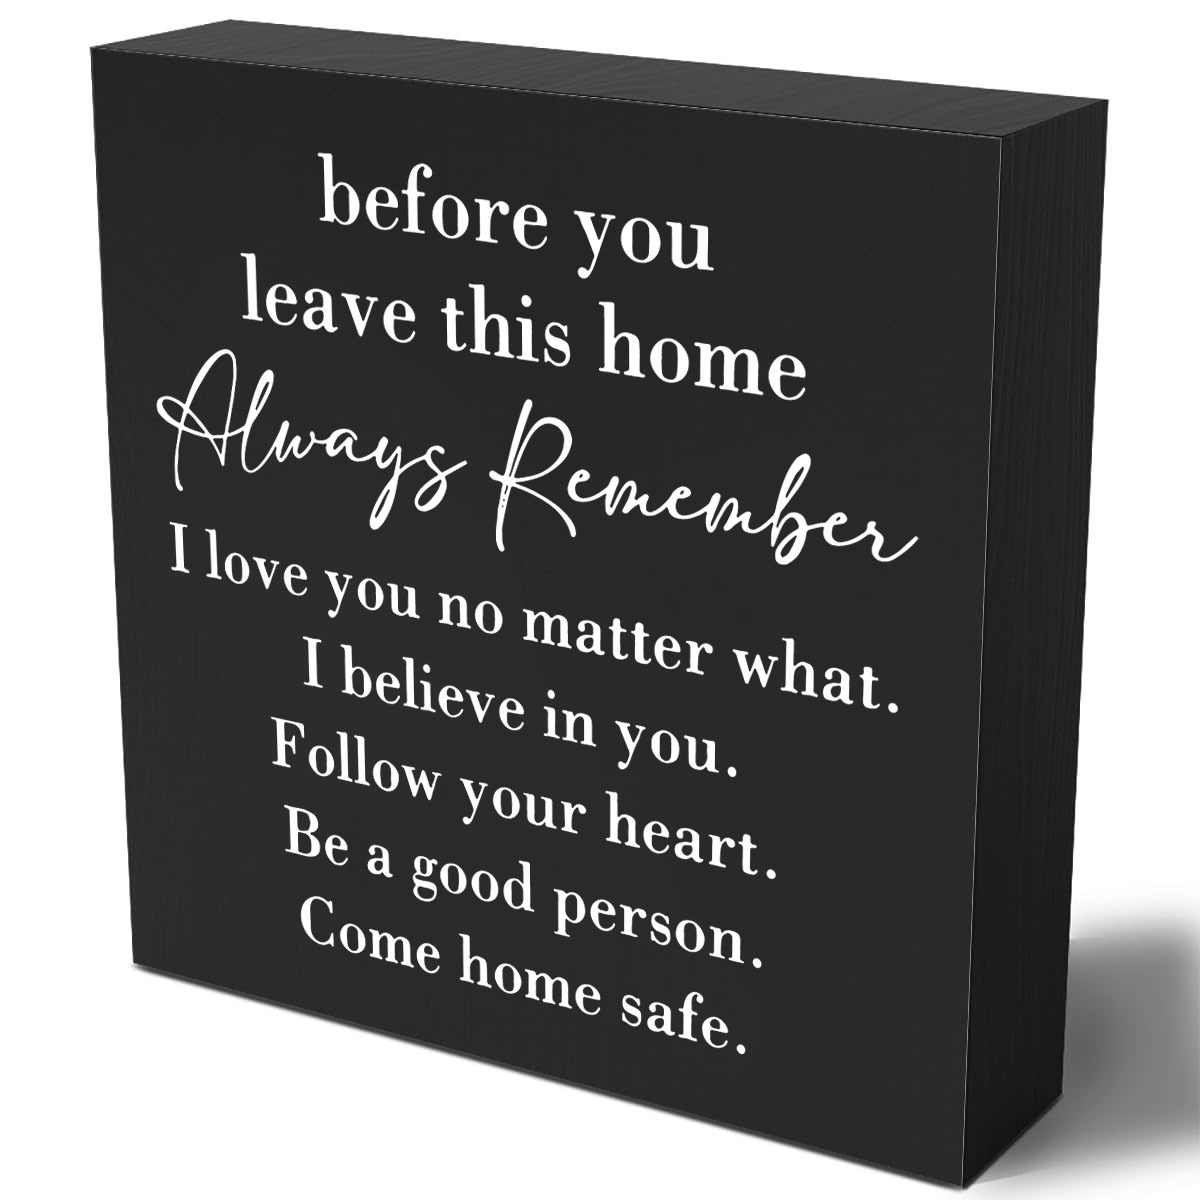 

1pc, Inspirational Home Farmhouse Decor Desk Decor Wooden Box Sign Always Remember You Are Braver Than You Think Rustic Black Wood Block Plaque Box Sign For Women Family Friends Shelf Table Decoration